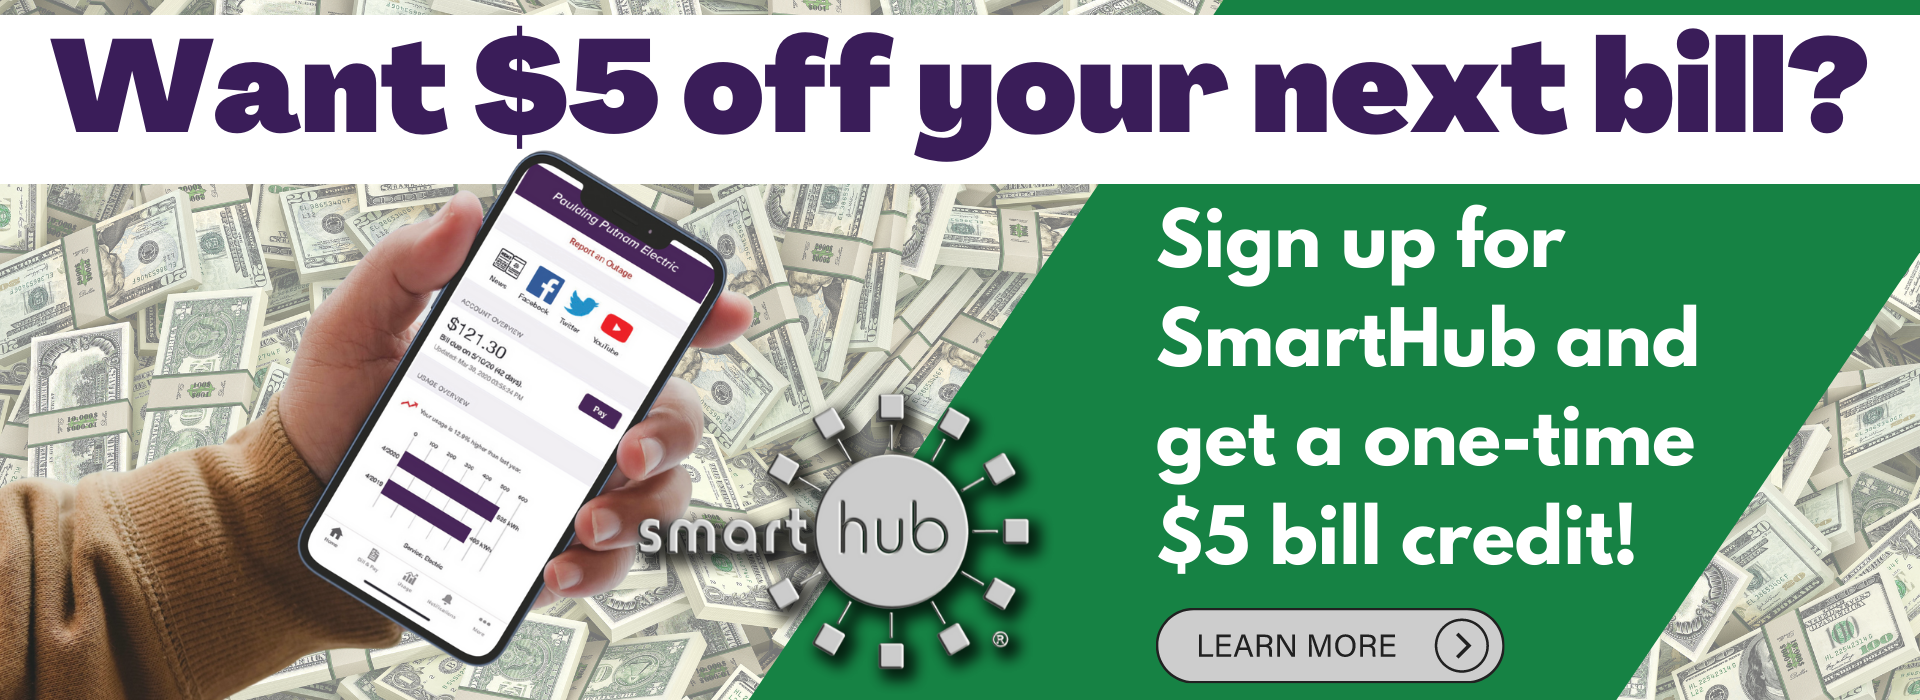 Sign up for SmartHub and get a $5 bill credit!